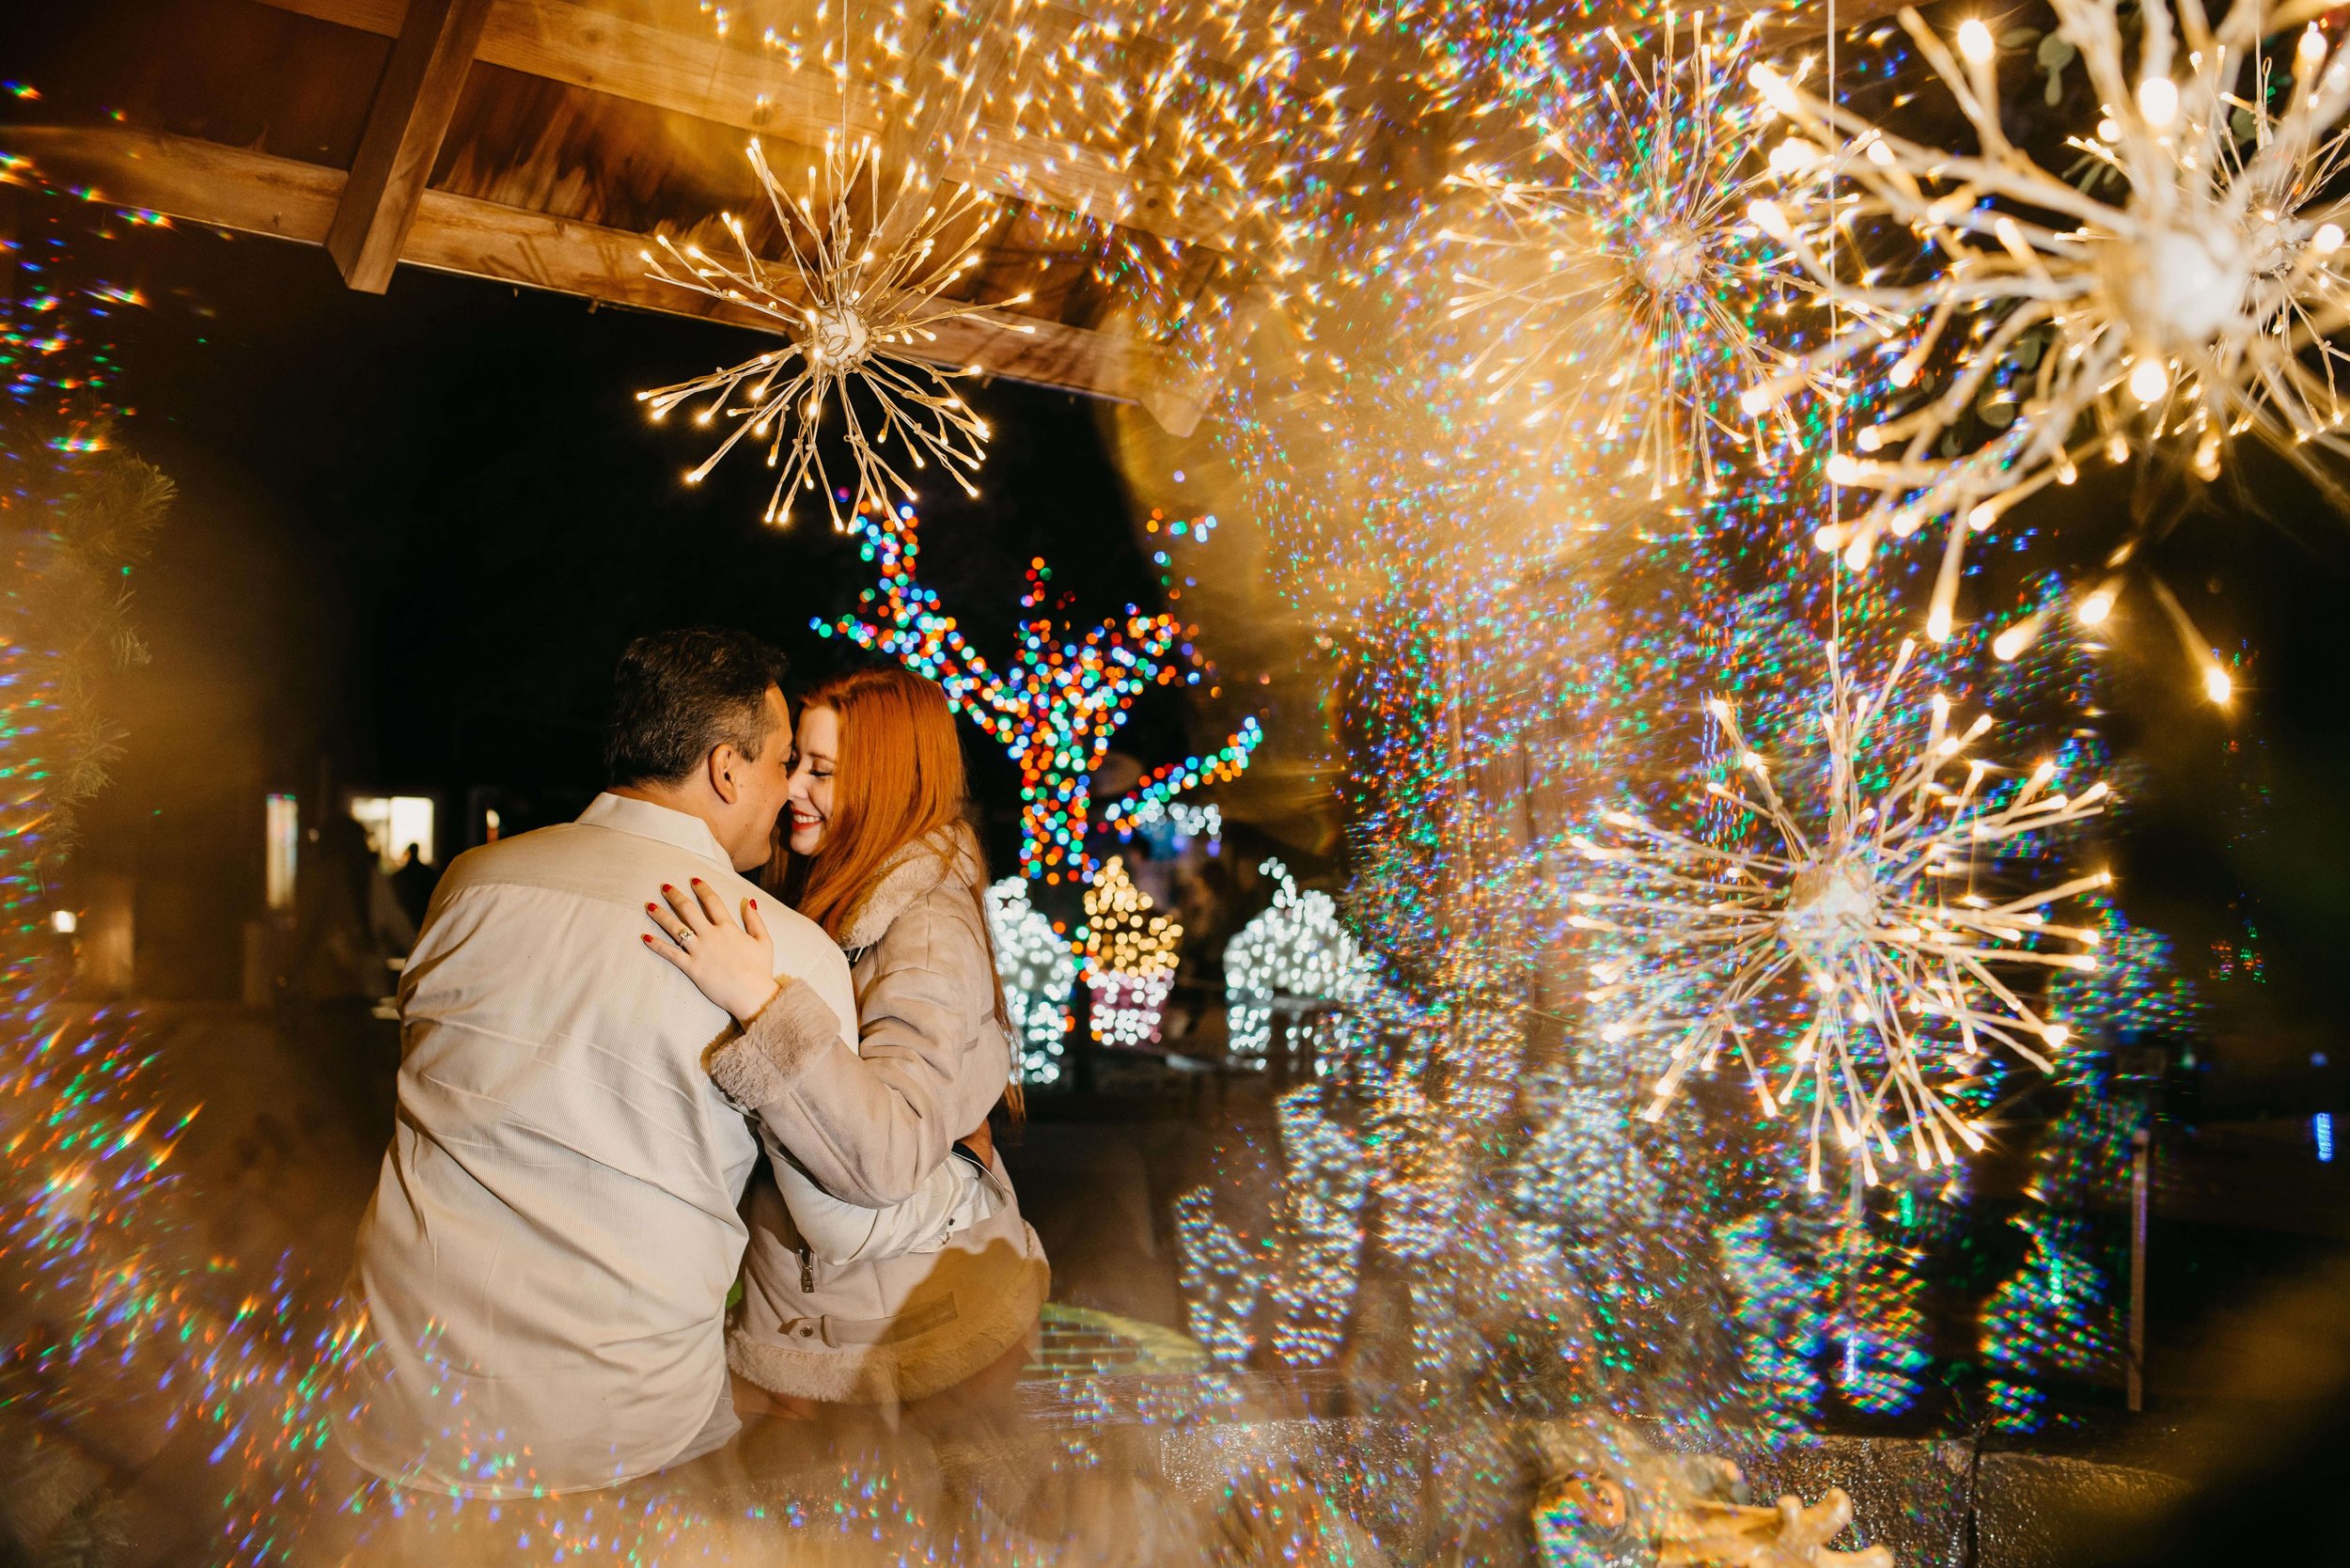 Newly engaged surprise proposal photos by Houston Elopement Photographer J. Andrade Visual Arts